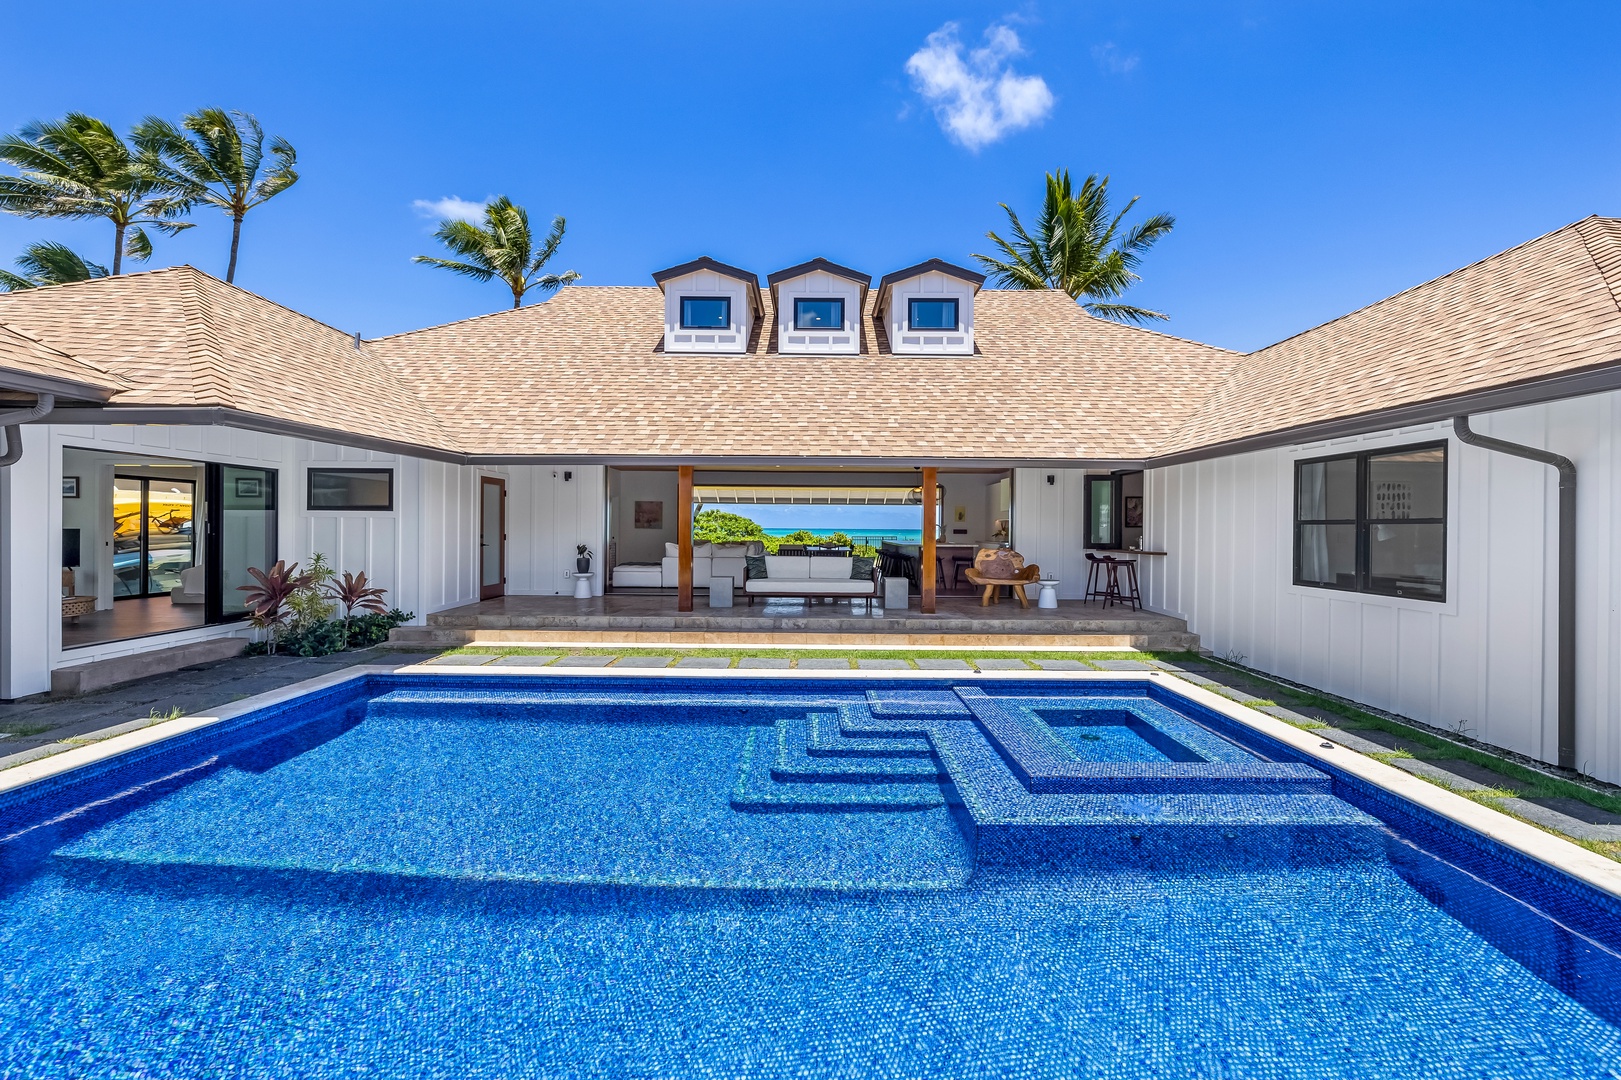 Kailua Vacation Rentals, Kailua Beach Villa - Welcome to unparalleled luxury, where every detail offers a sublime taste of an exquisite Hawaiian vacation.